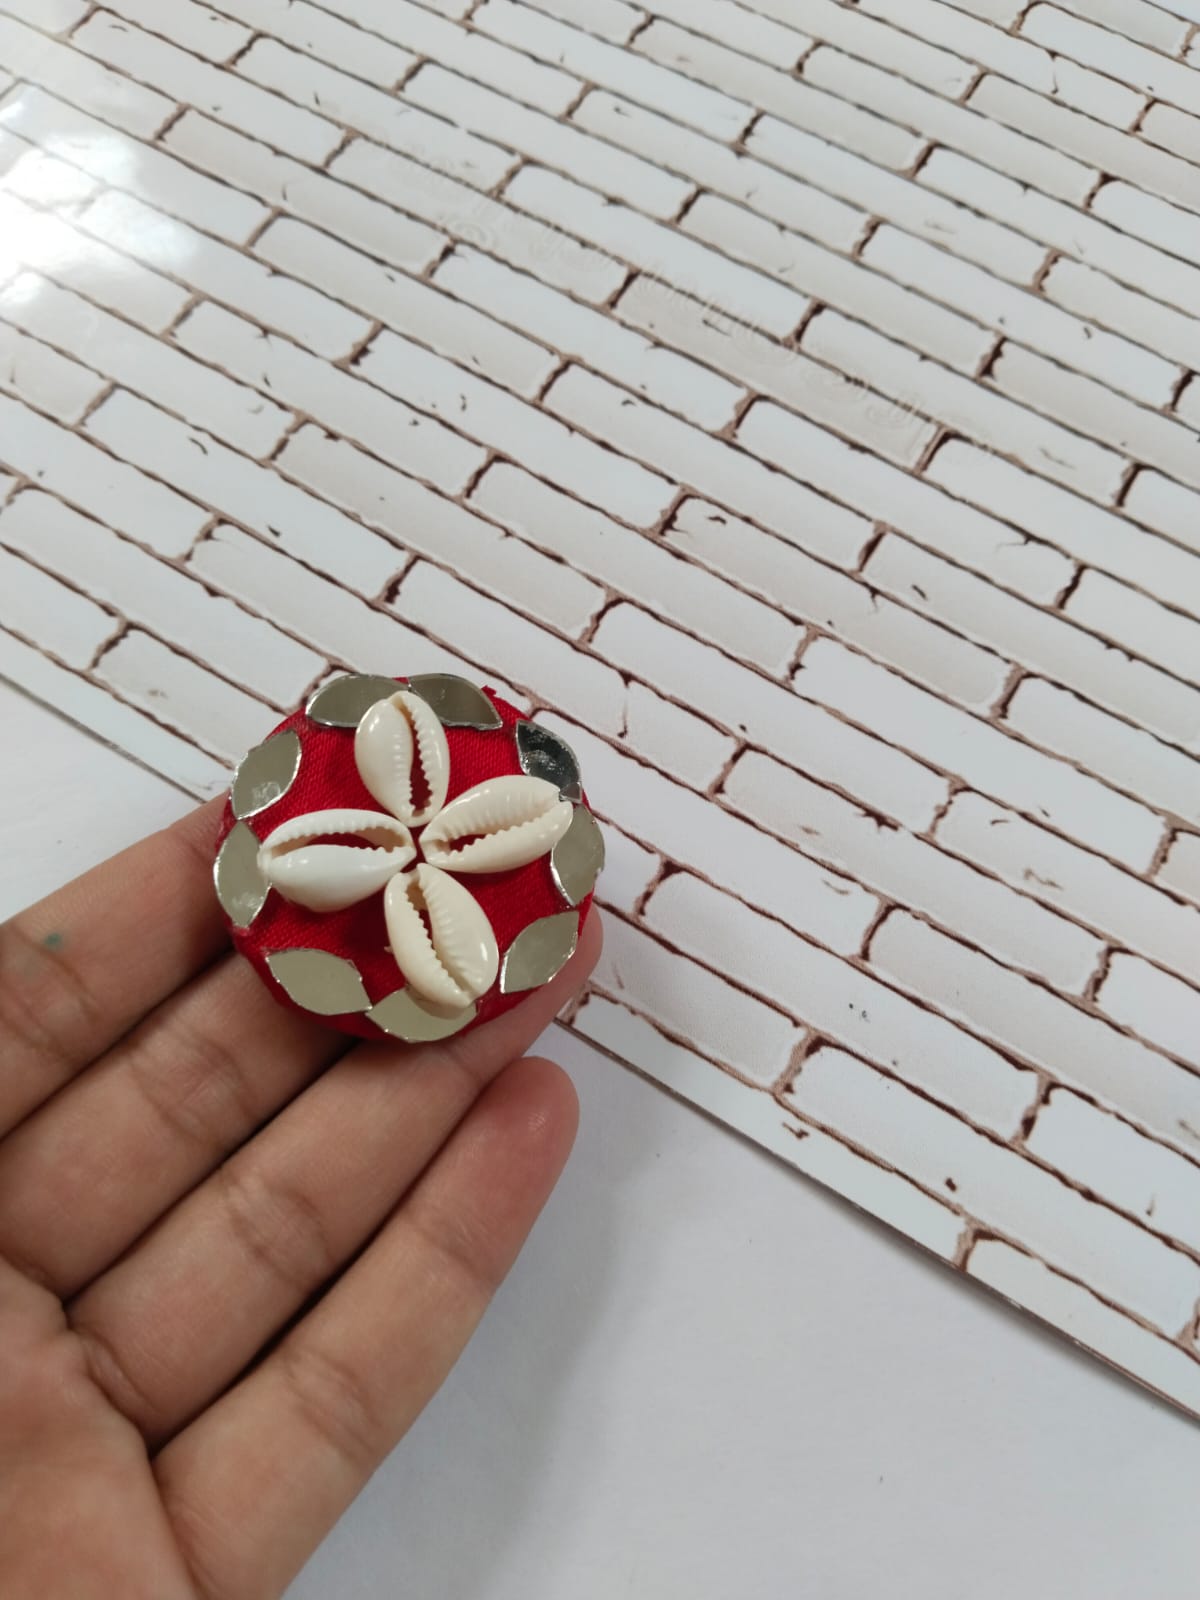 Finger holding red ring with mirrors and white sea shells